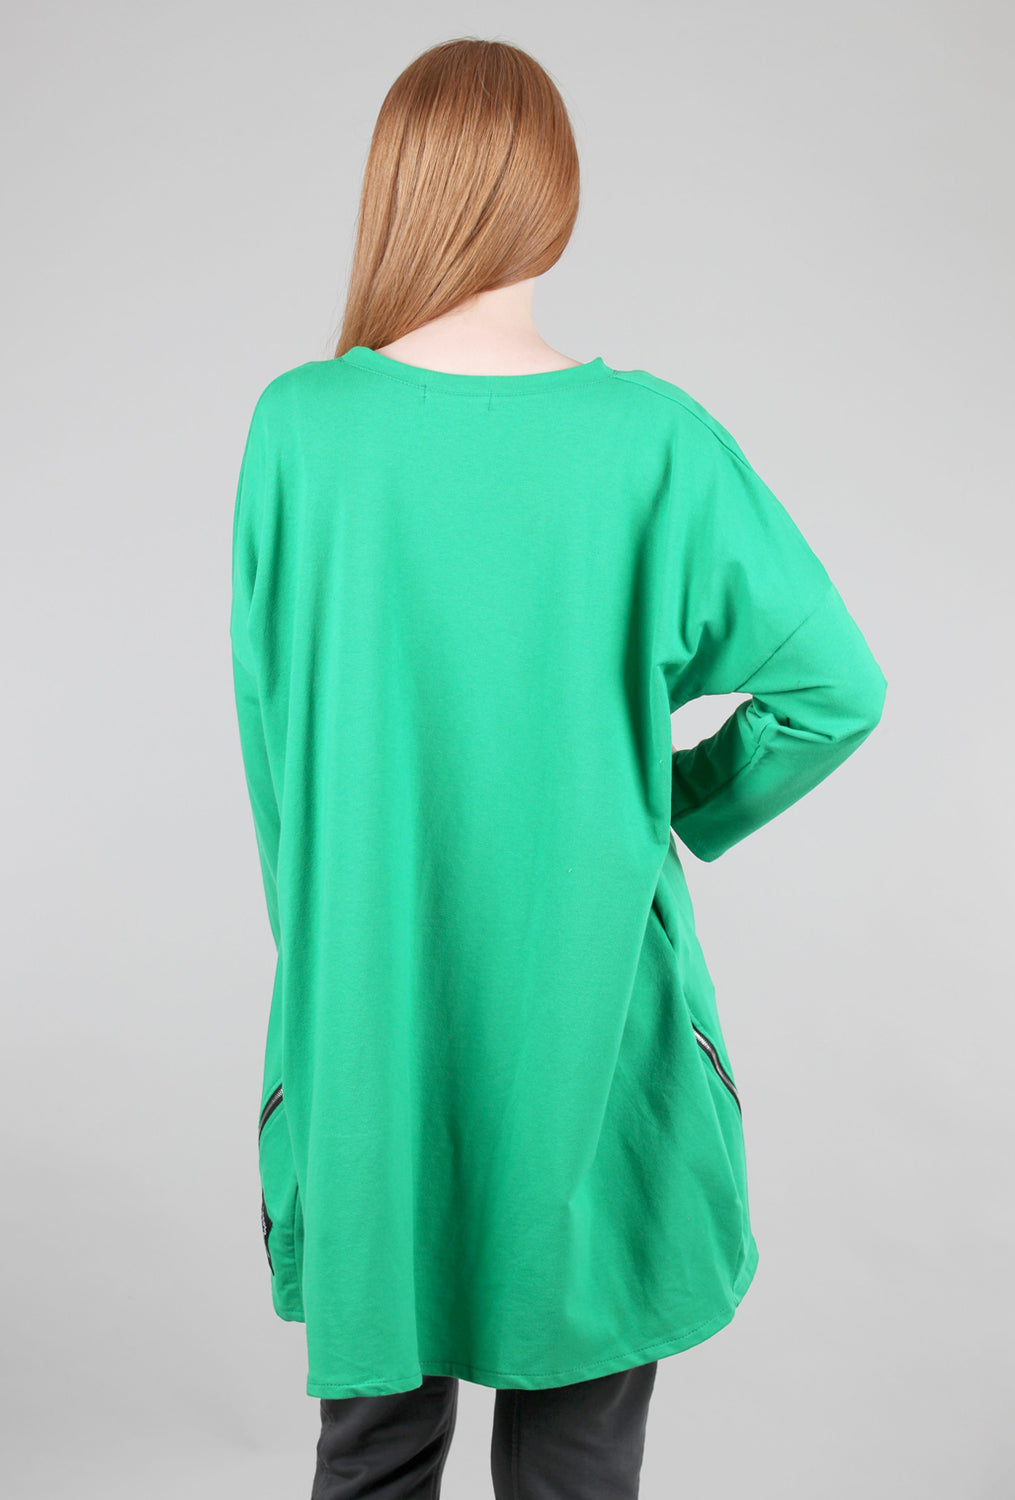 Four Face Pullover, Green